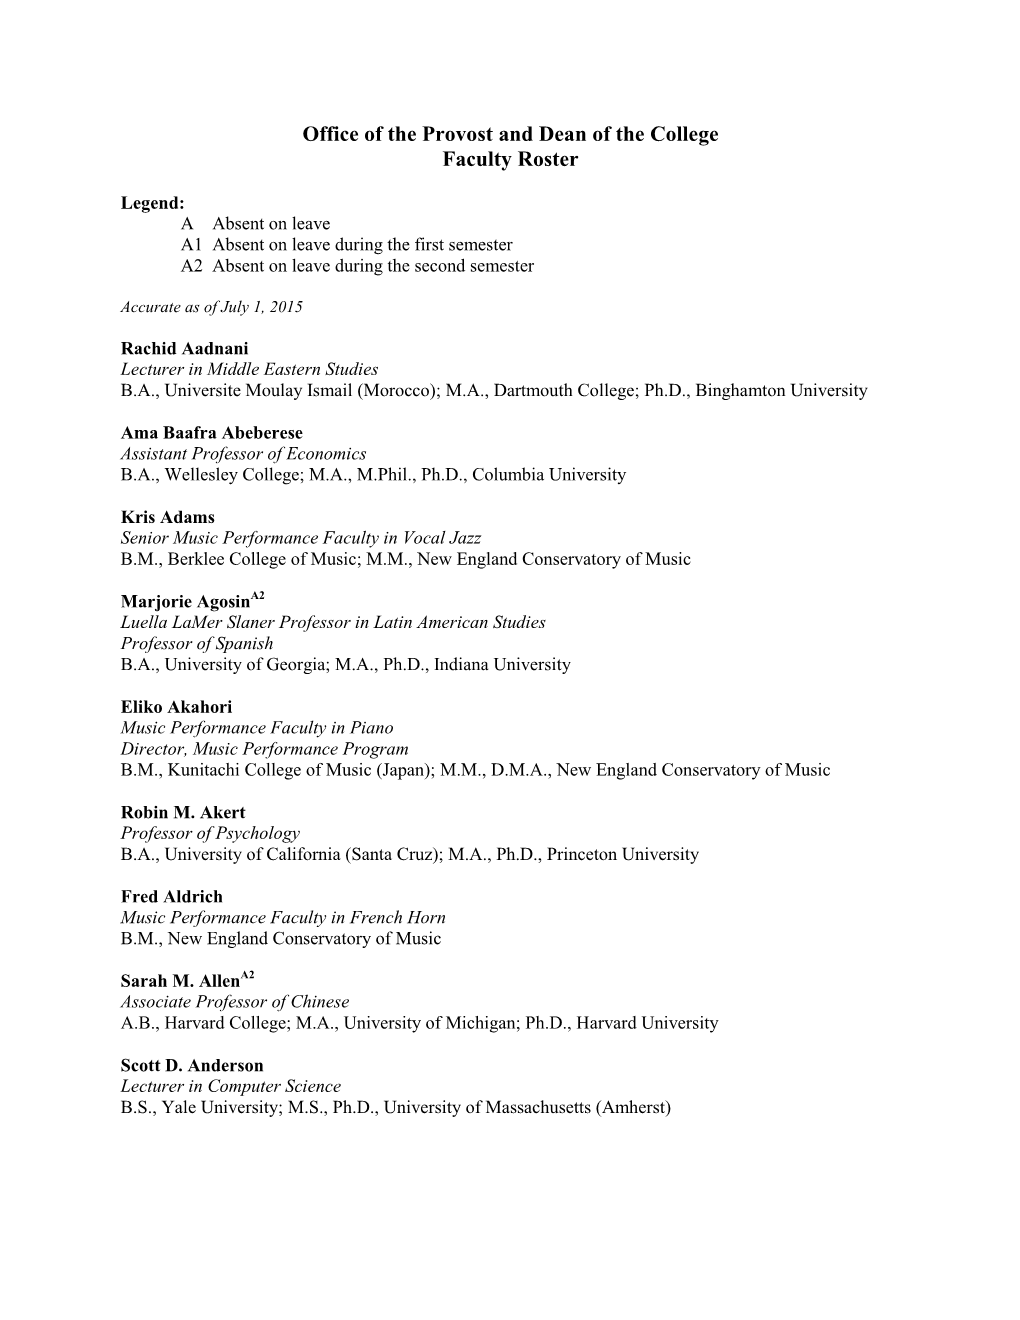 Office of the Provost and Dean of the College Faculty Roster